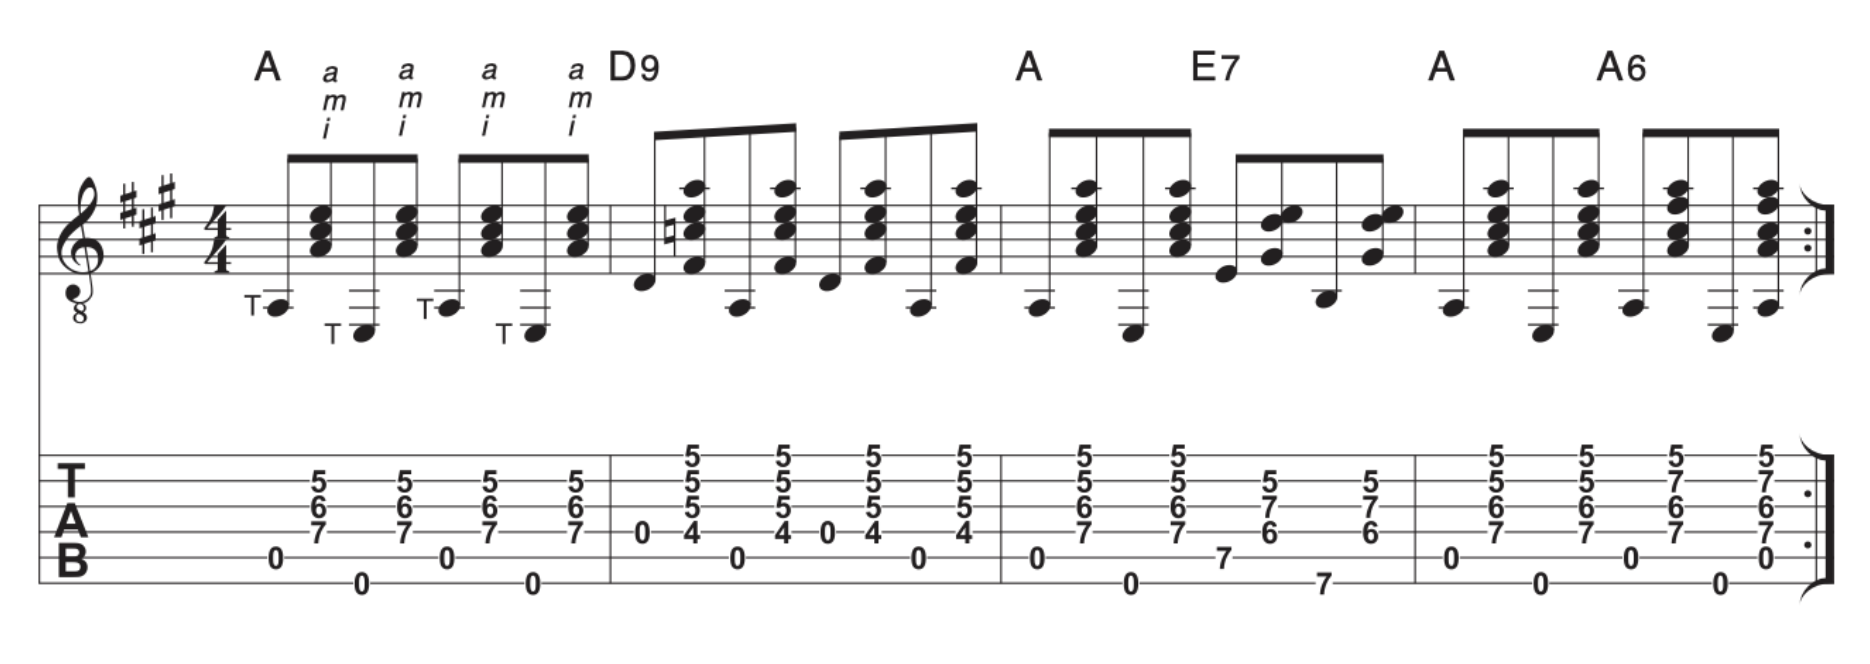 A Travis picking exercise for guitar is shown in musical notation and tablature.